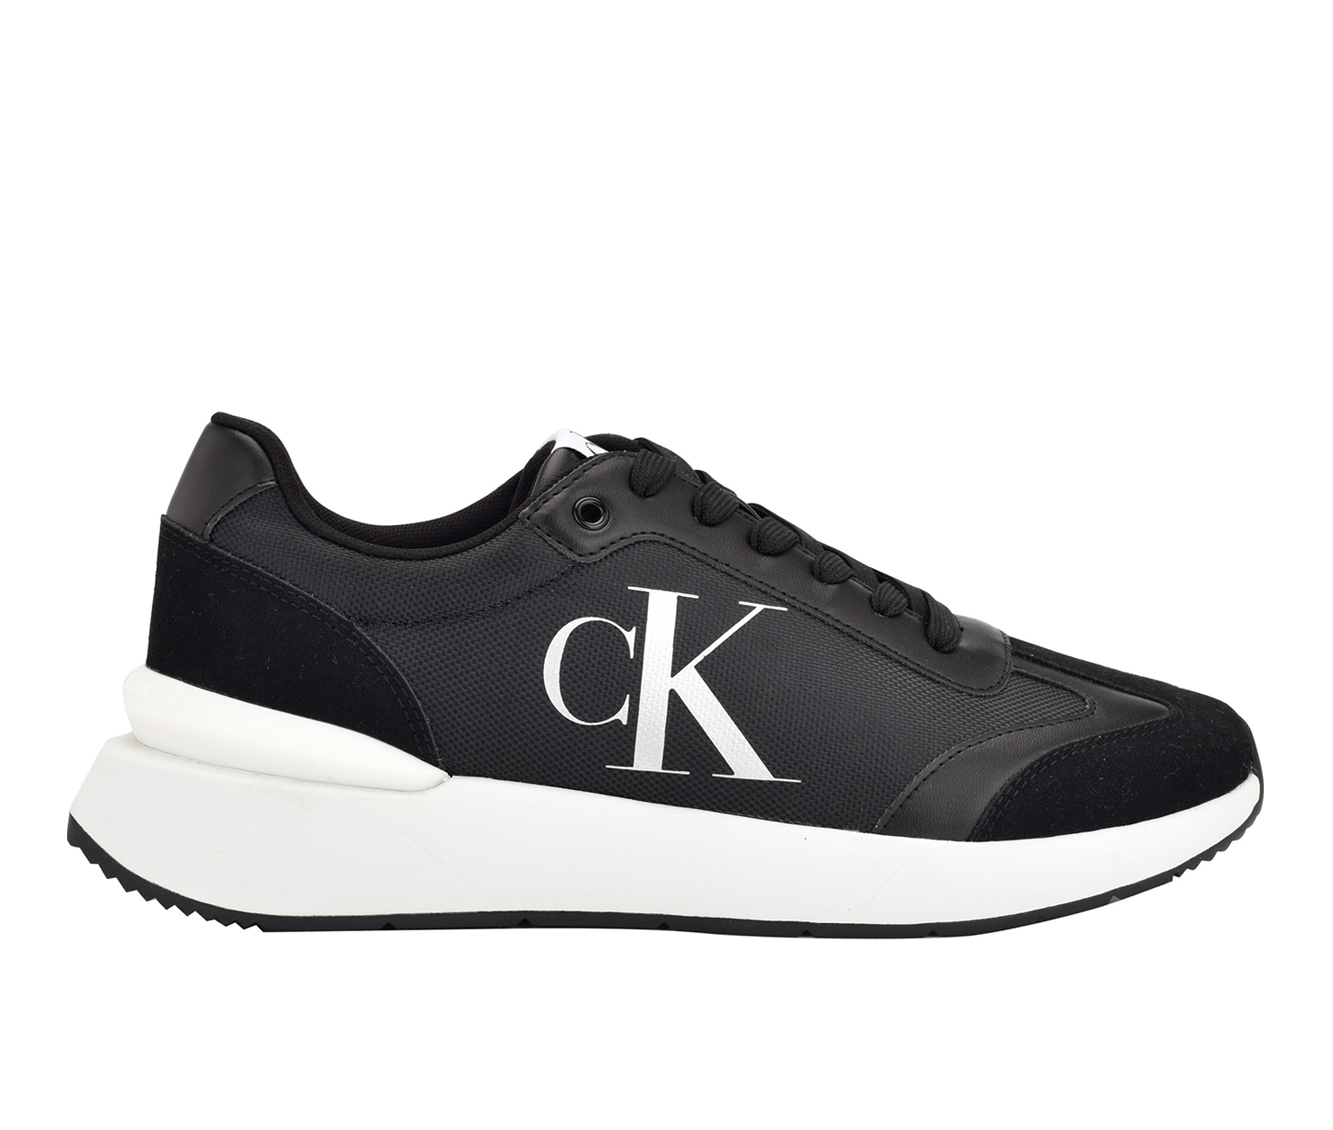 Calvin Klein Shoes, Fashion Sneakers at Shoe Carnival